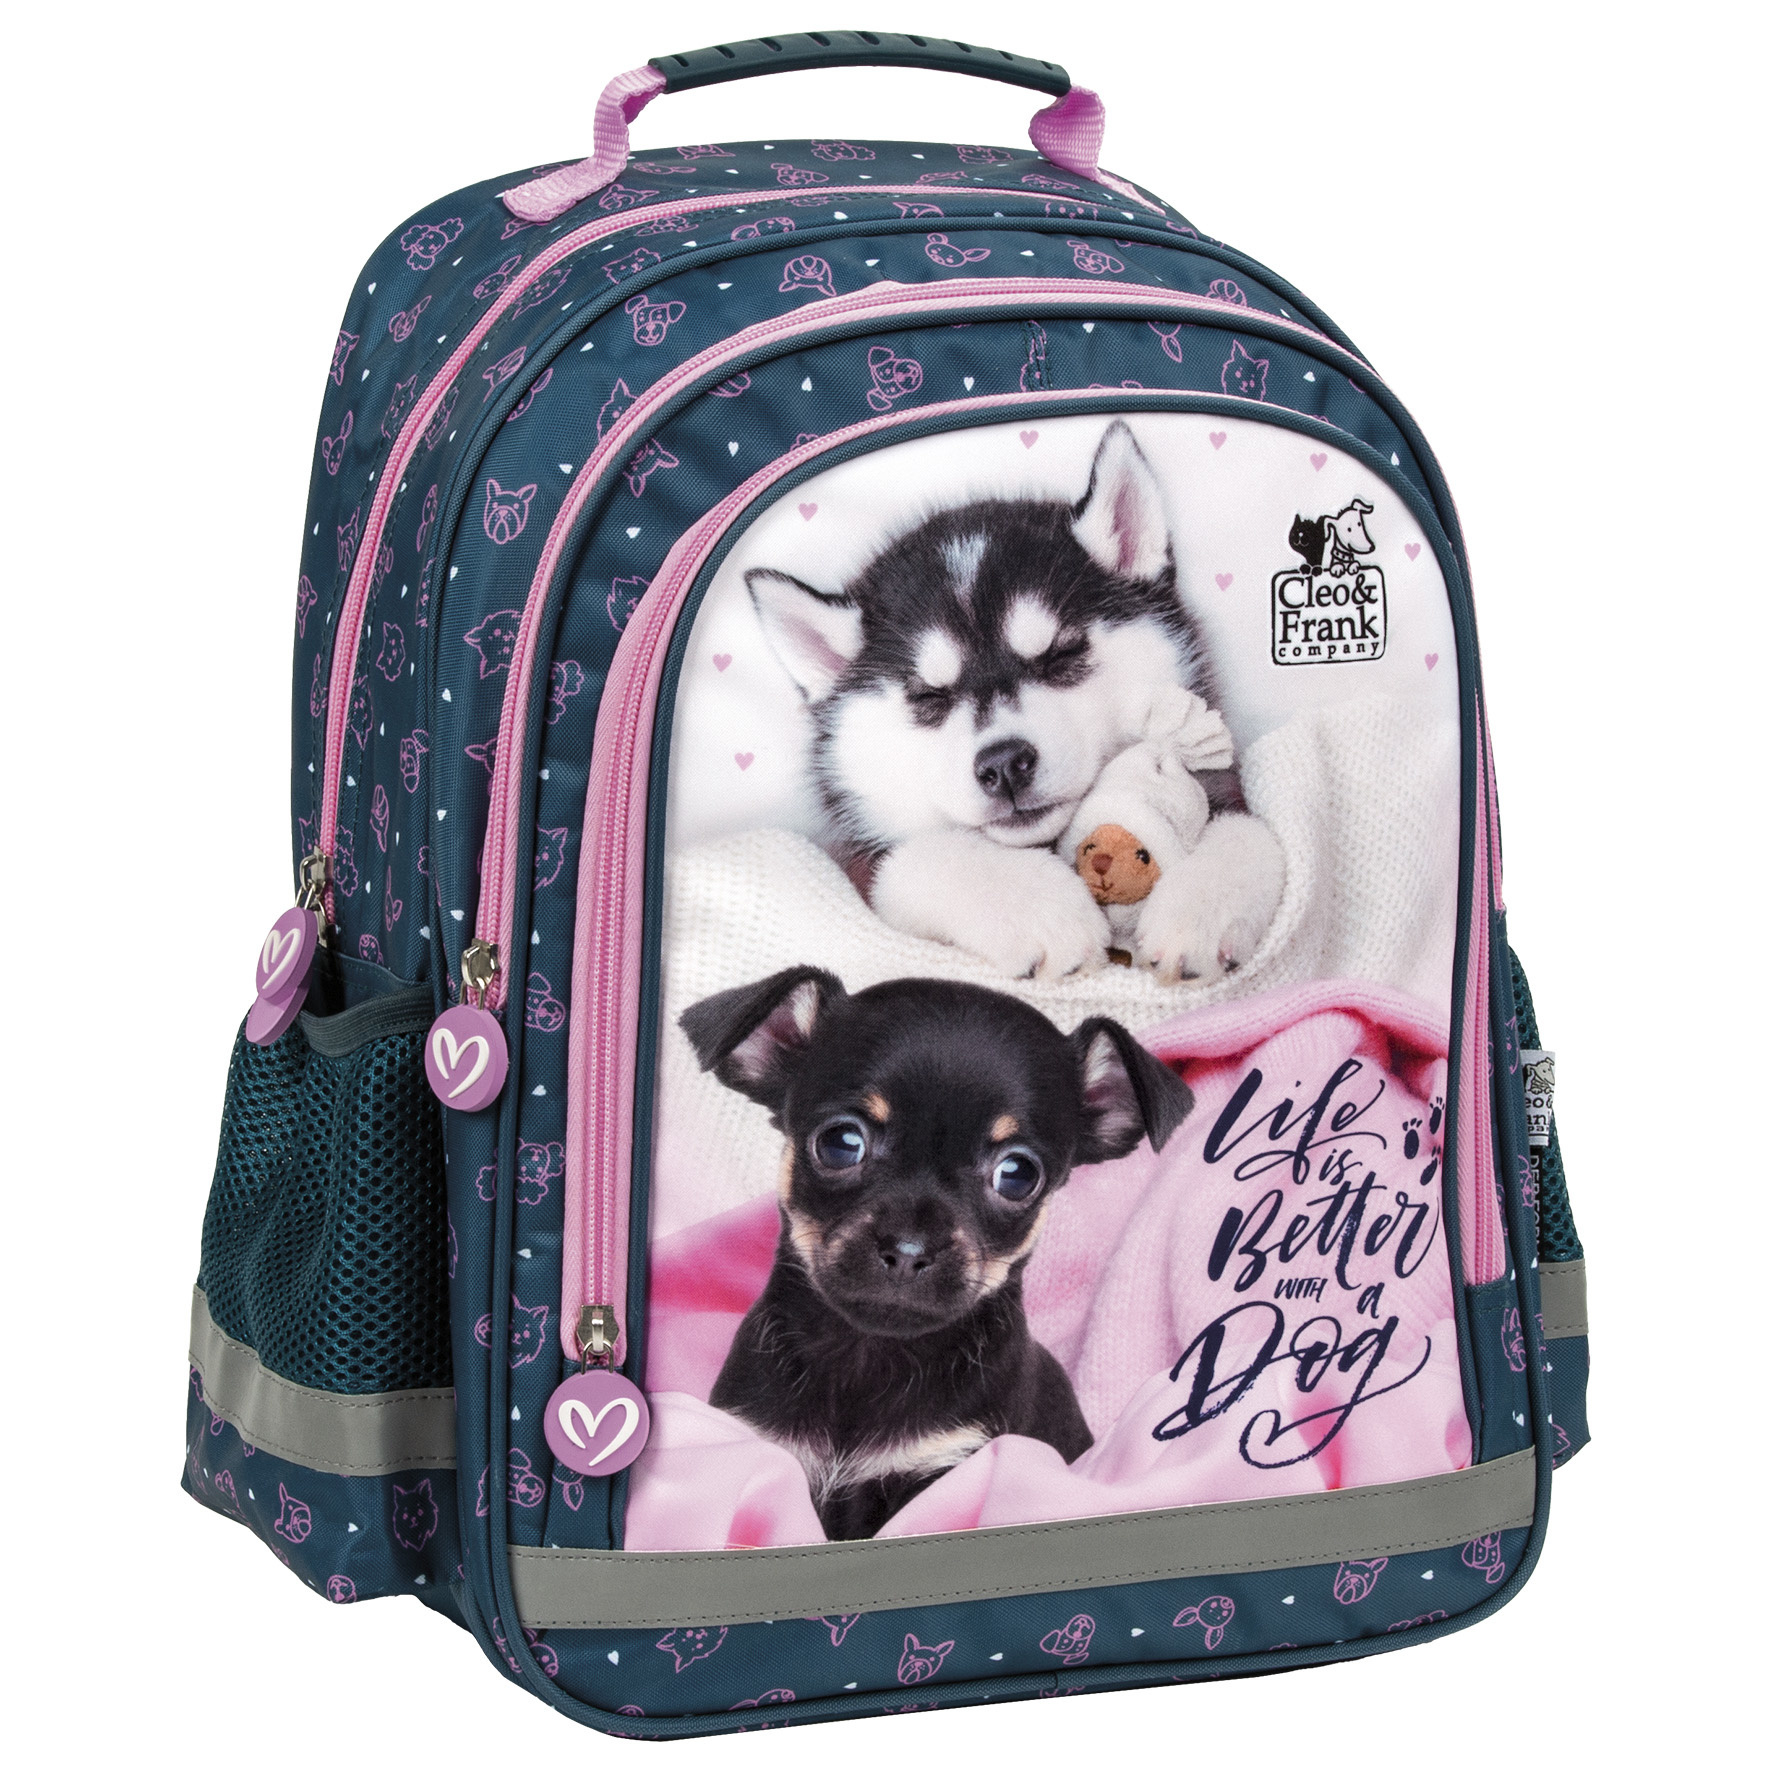 Cleo & Frank Backpack, Pups - 38 x 28 x 17 cm - Polyester